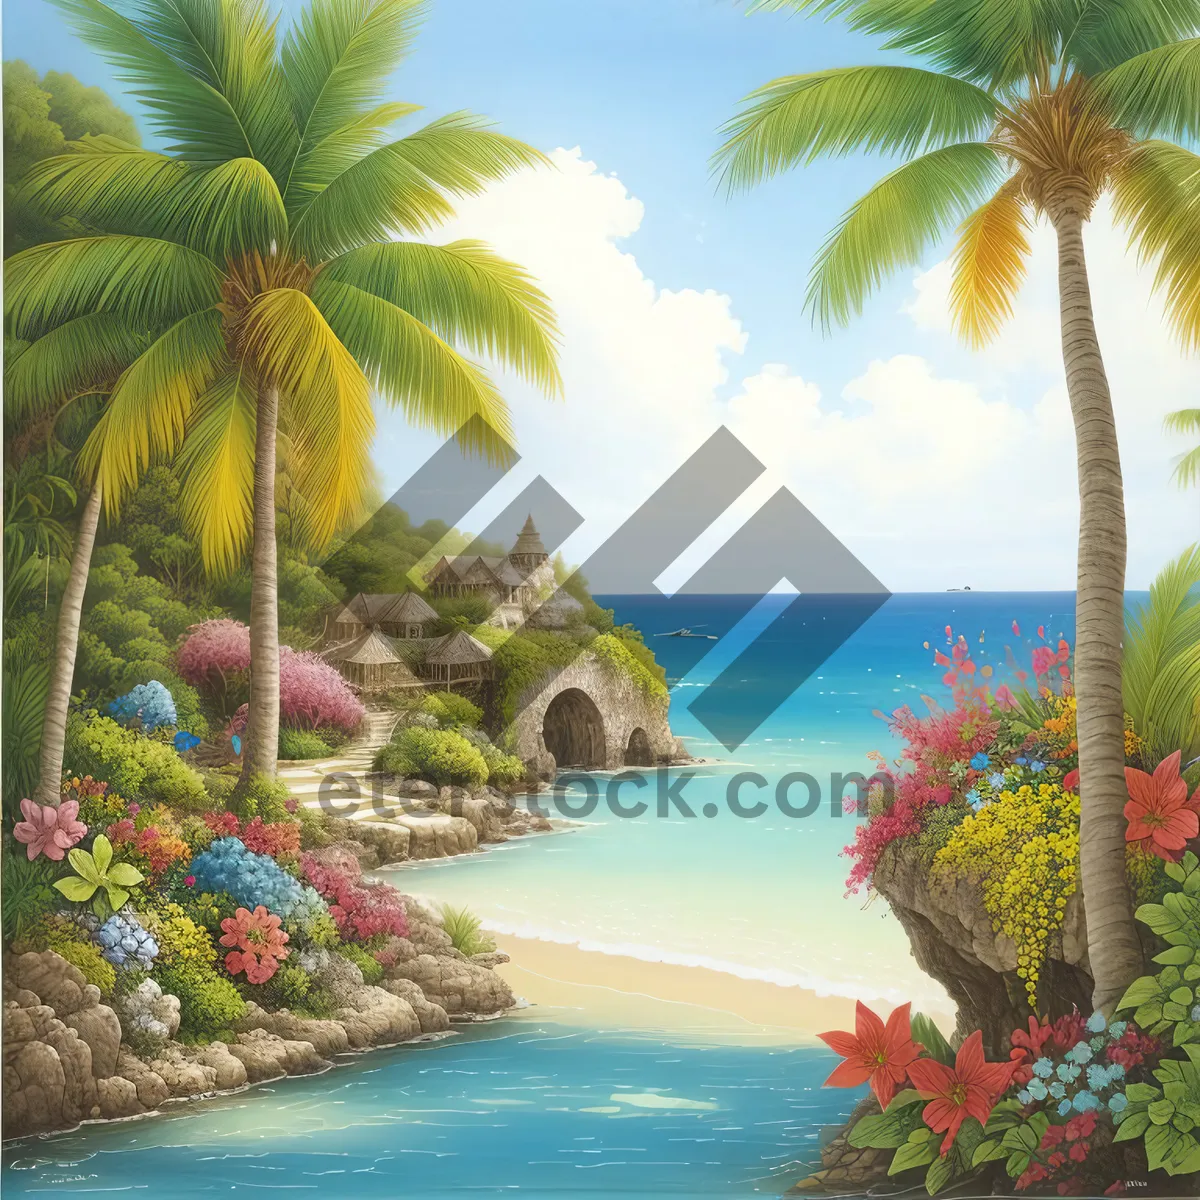 Picture of Tropical Oasis Bliss: Coconut Palm Paradise by the Turquoise Sea